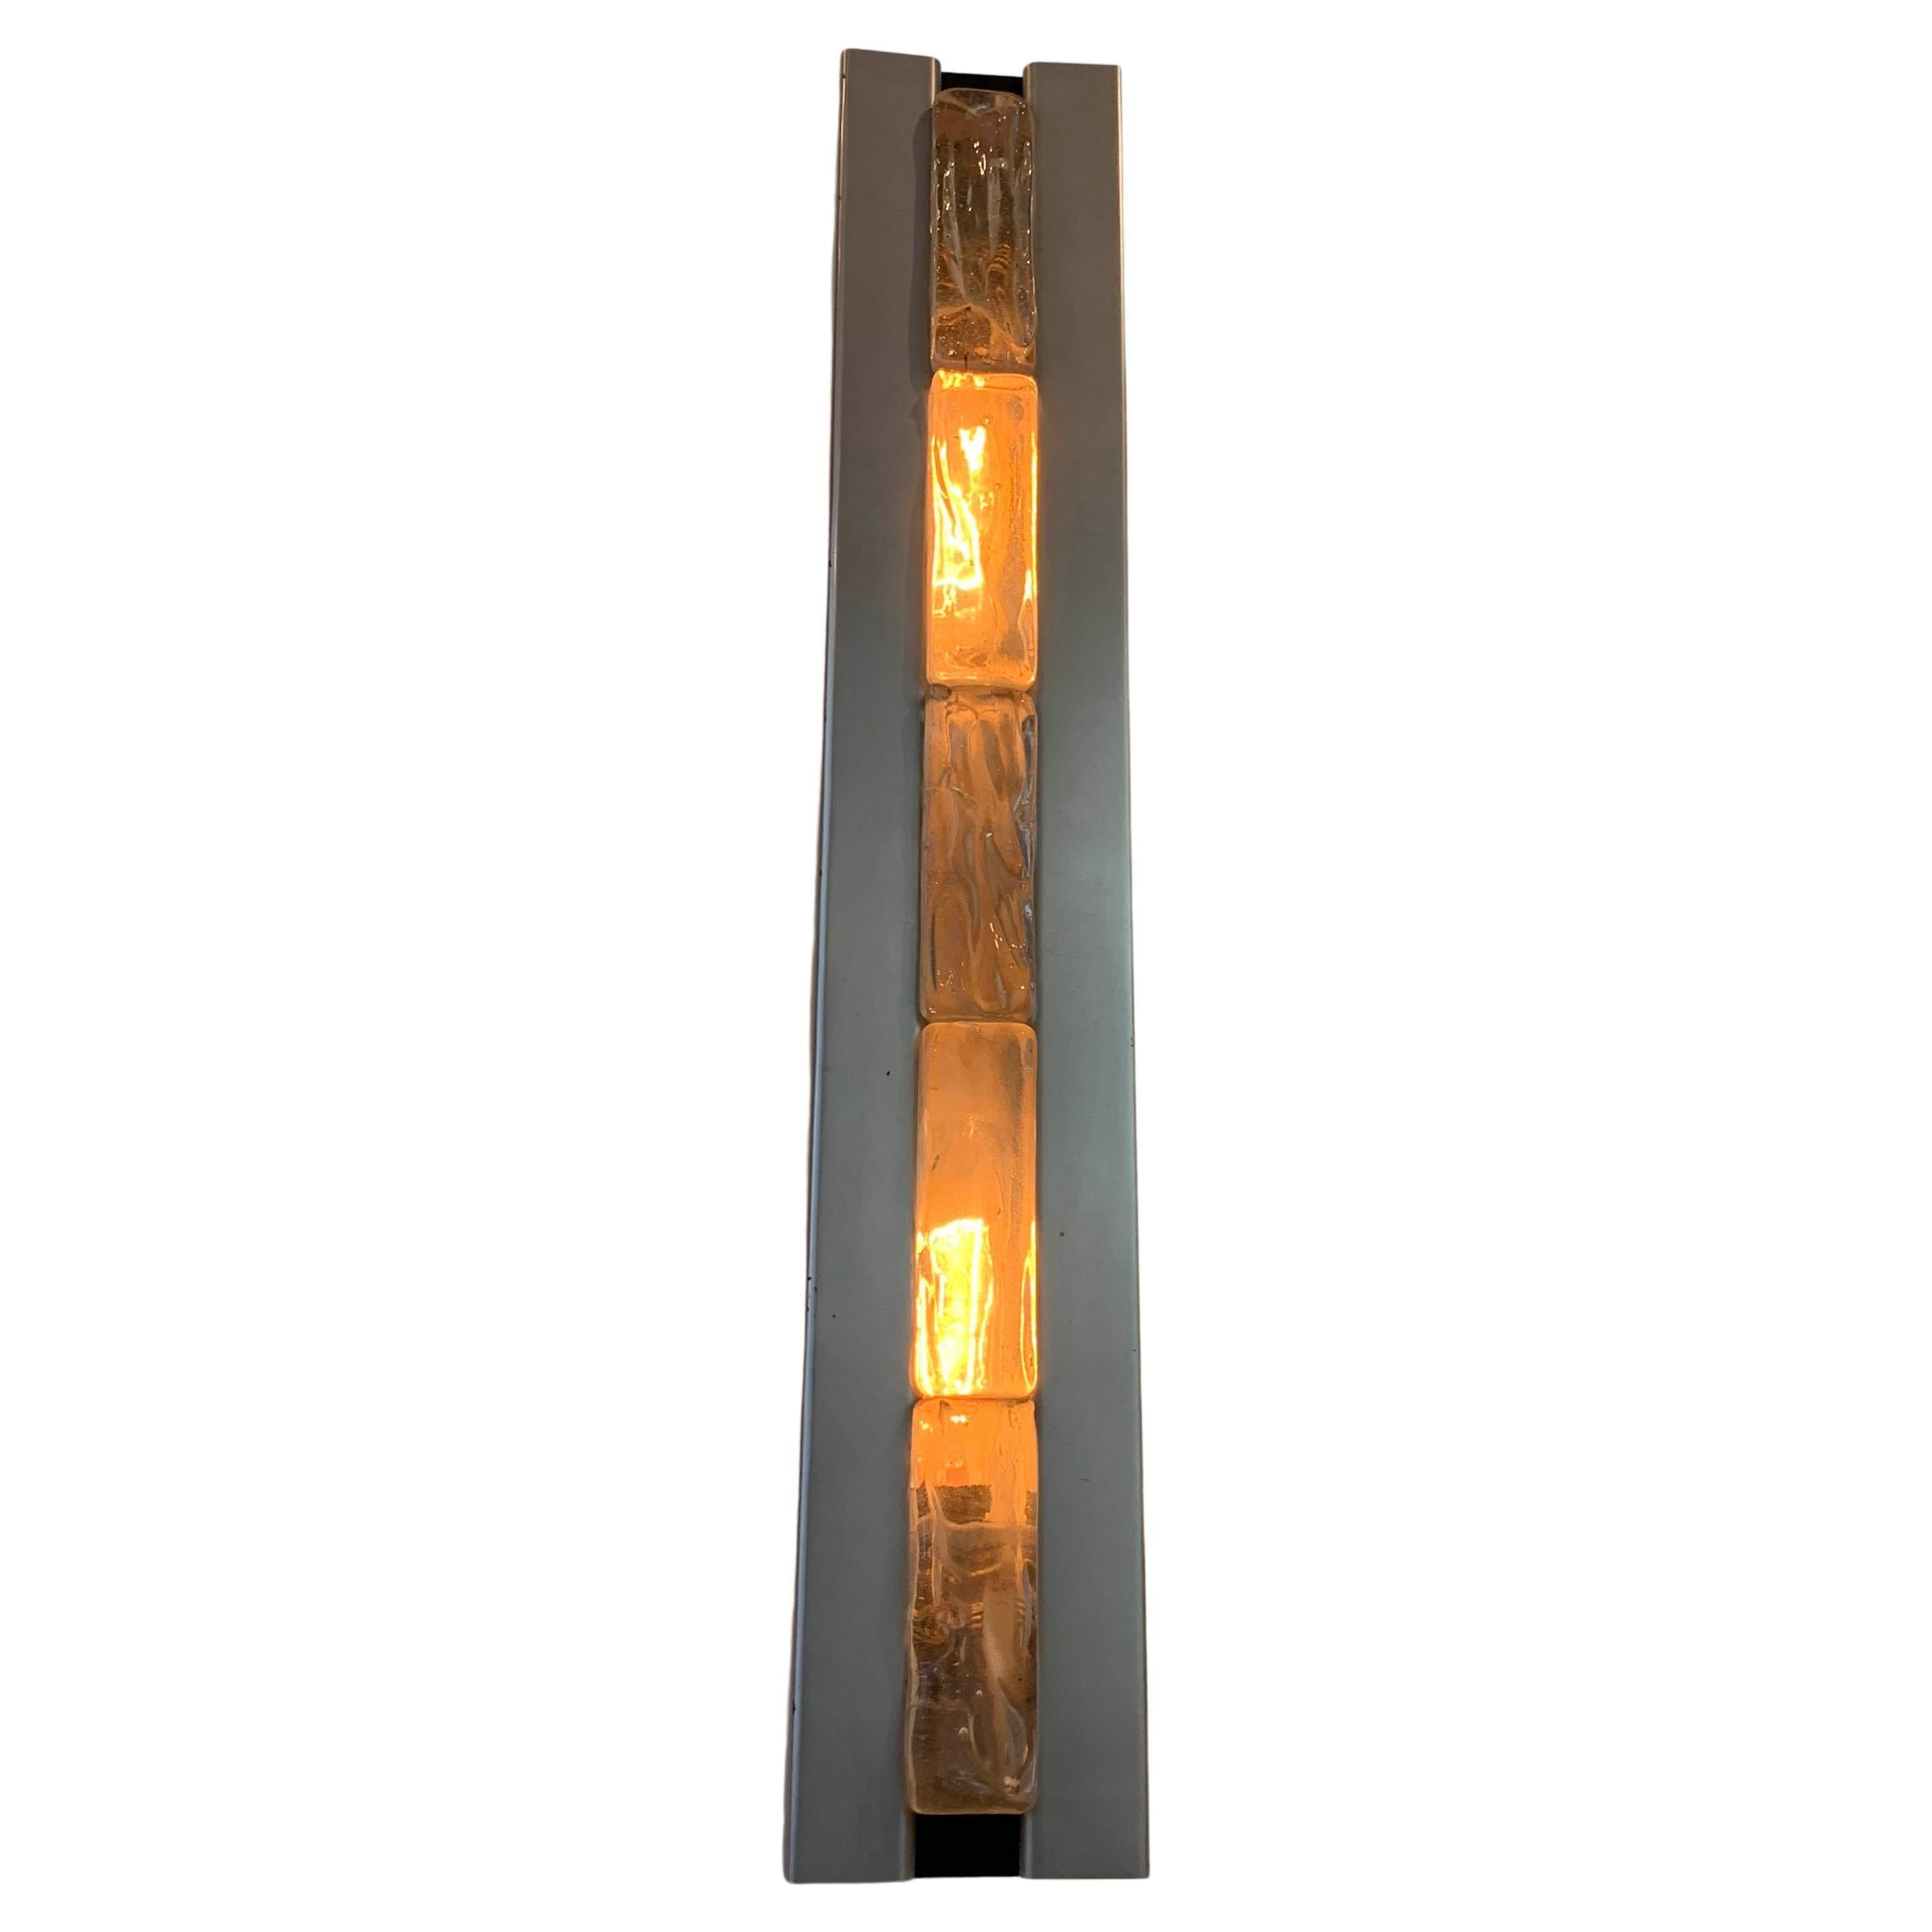 A stunning pair of French Art Deco wall sconces from the 1970s.
Five Saint Gobain brick shades in frosted glass with polished details and a steel frame.
Can be delivered and wired for American or European use.
Each brick measures:
H: 10 cm
W: 3